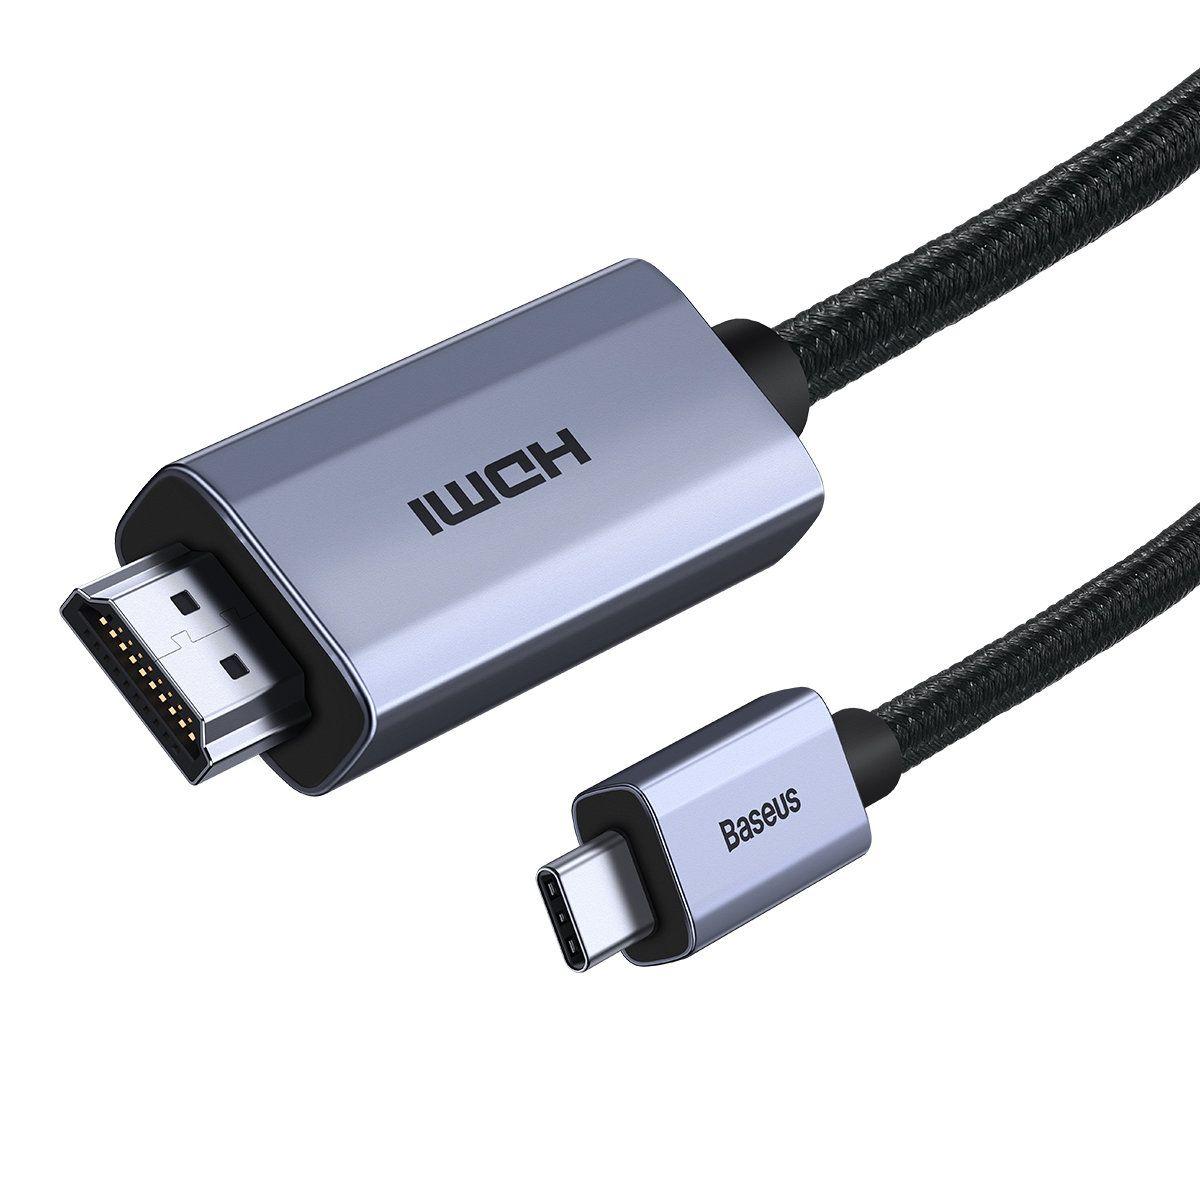 Baseus High Definition Series adapter cable USB Type C - HDMI 2.0 4K 60Hz 2m black (WKGQ010101)